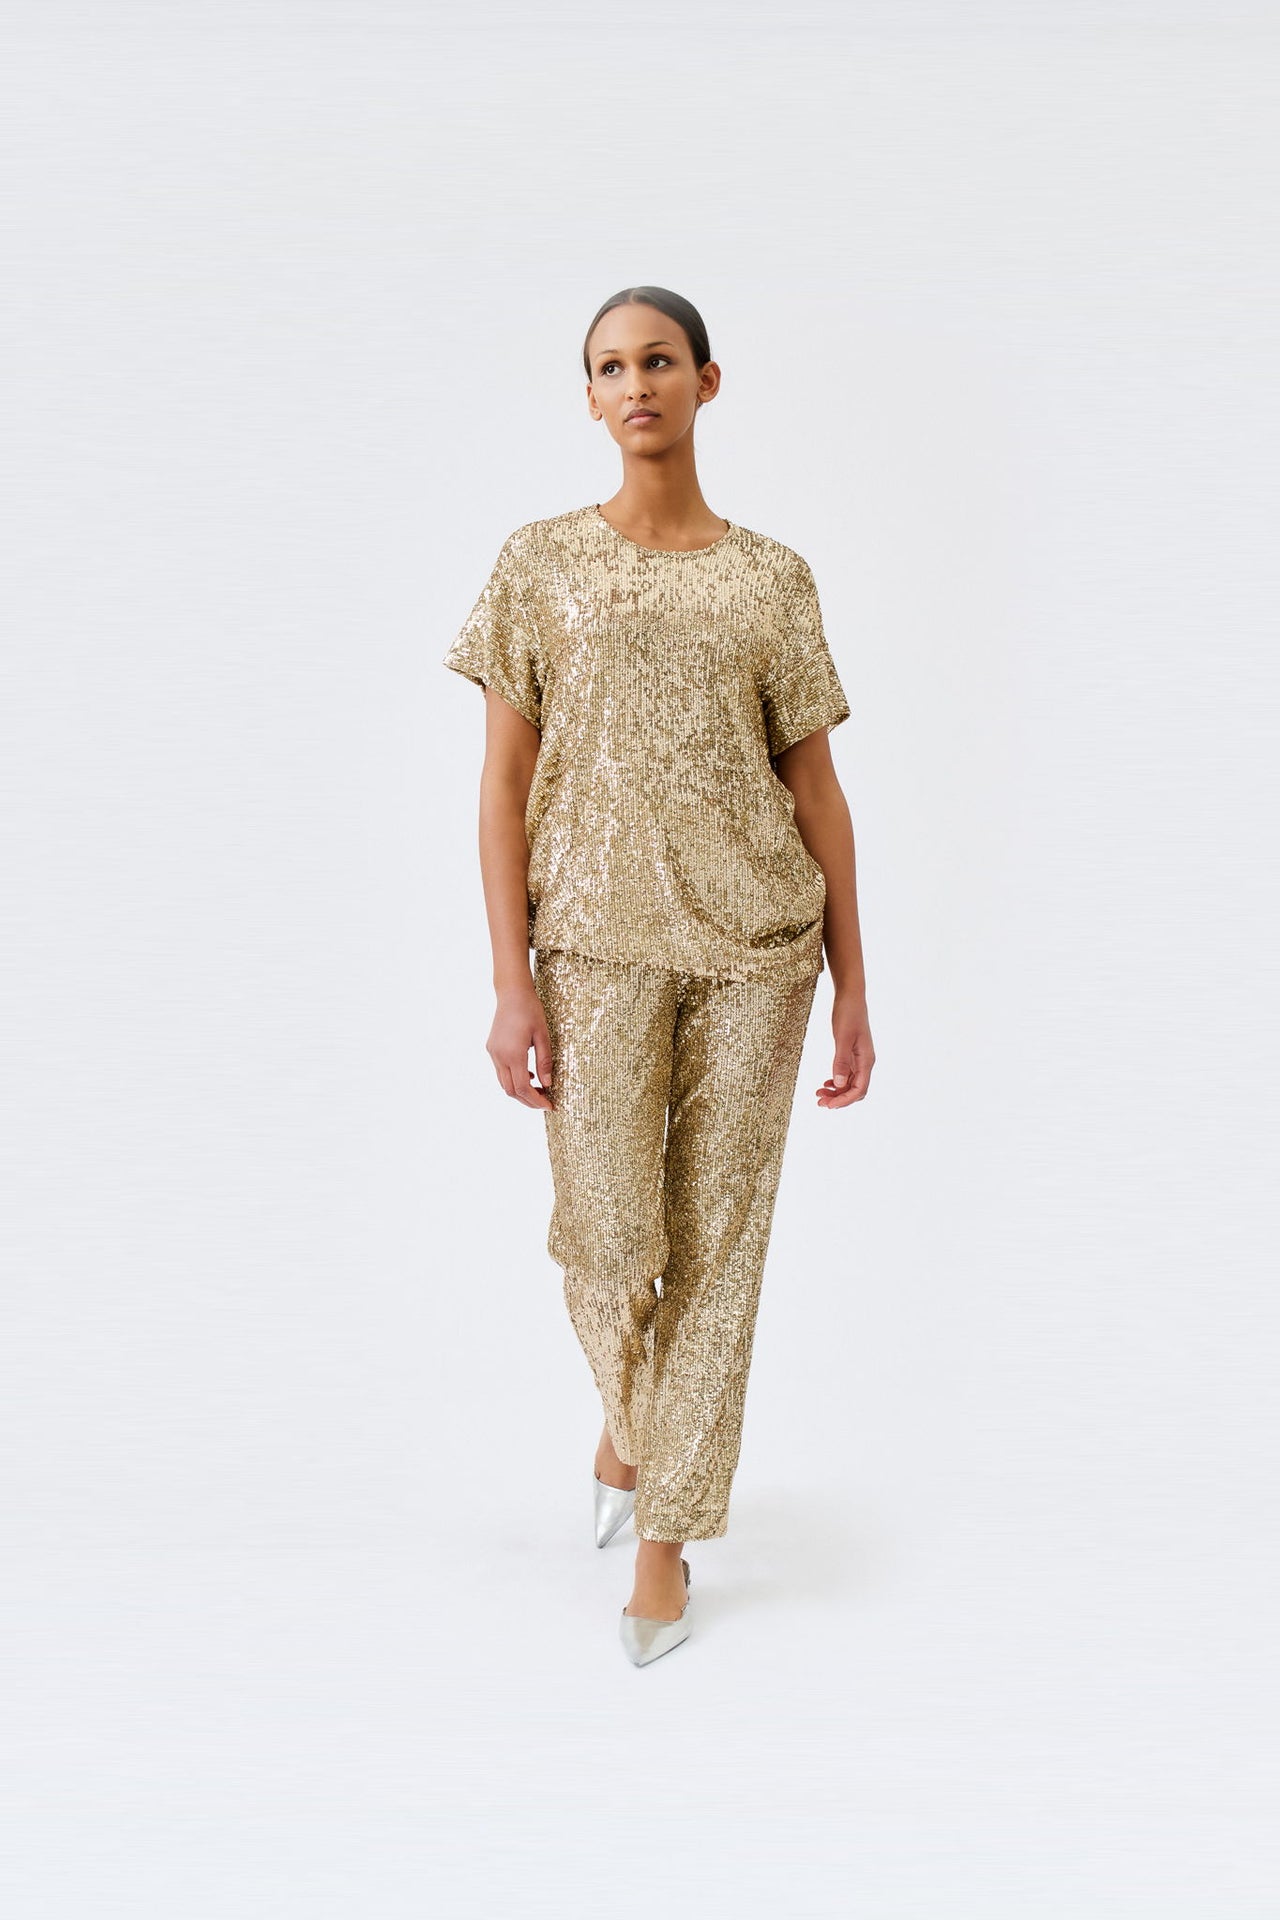 wingate collection tia gold top on female model with silver slippers dynamic